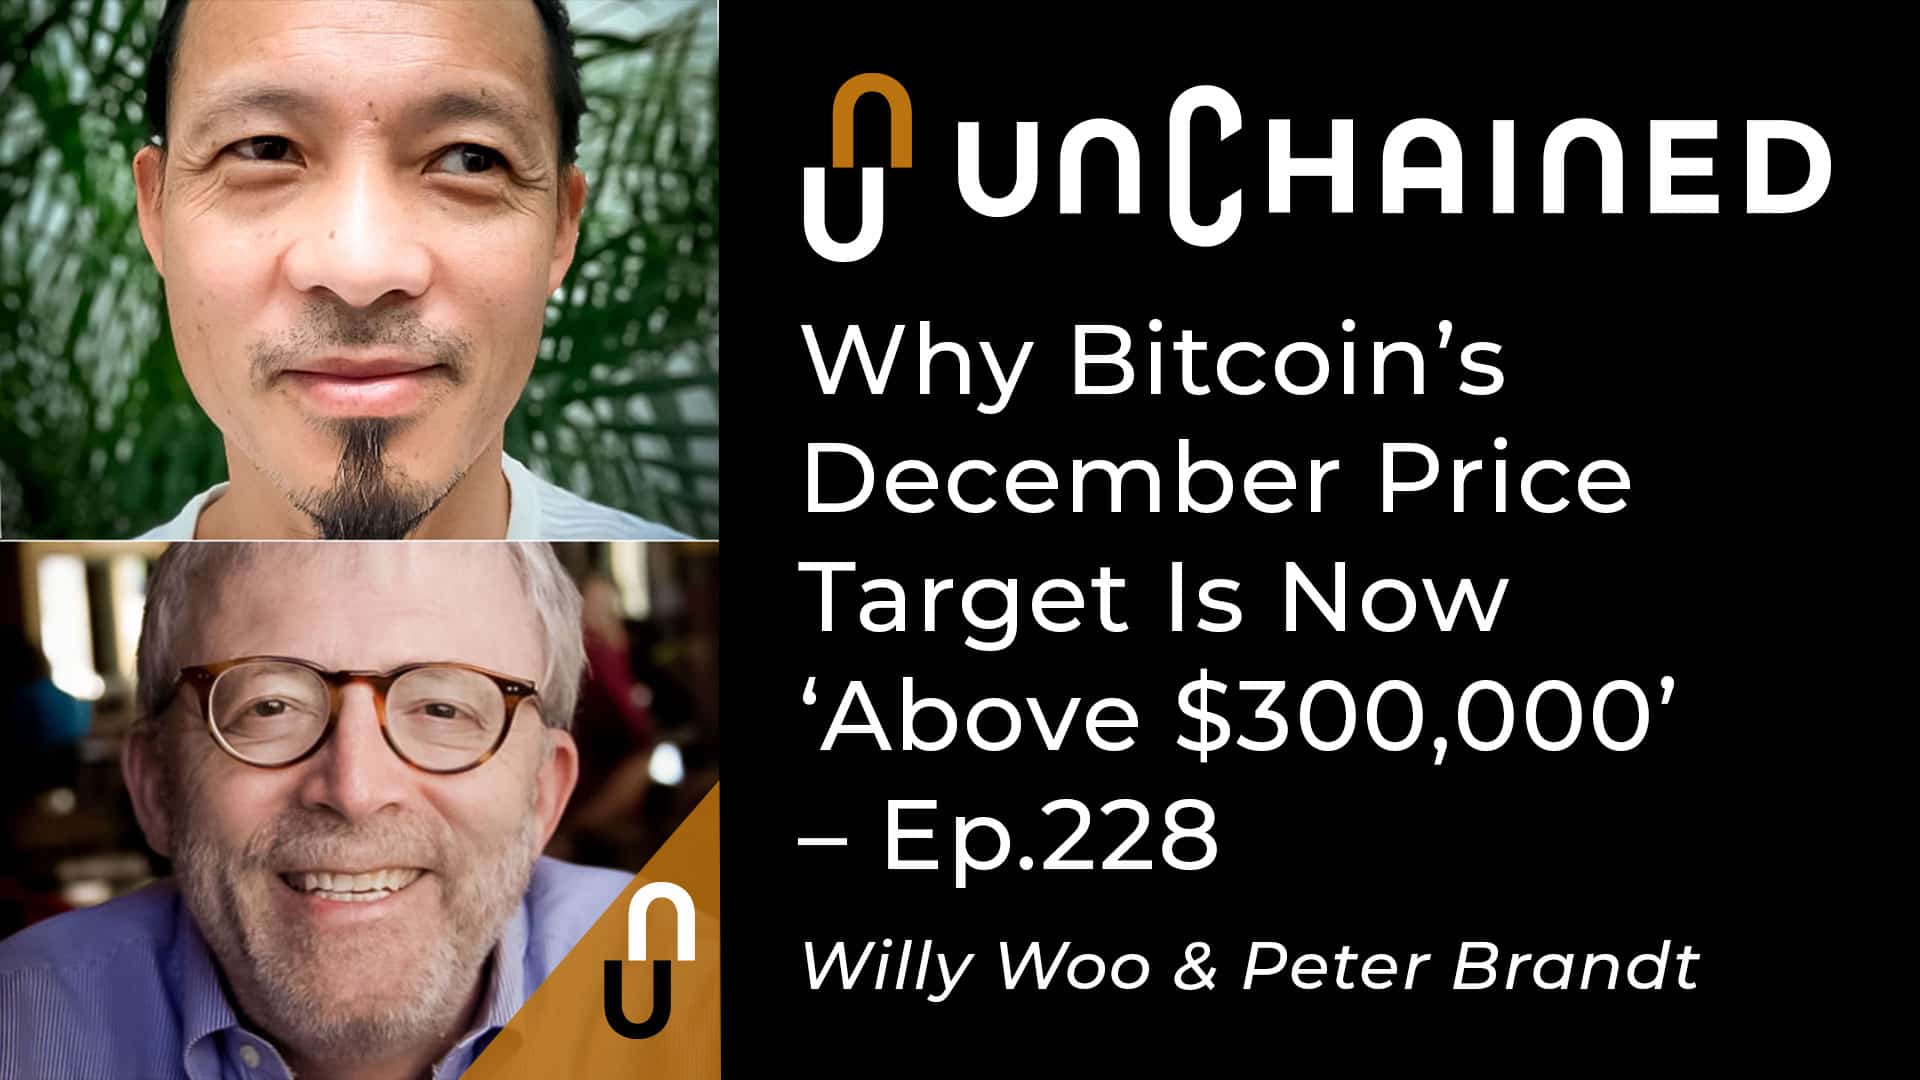 Unchained - Ep.228 - Charting Bitcoin’s Growth With Willy Woo and Peter Brandt